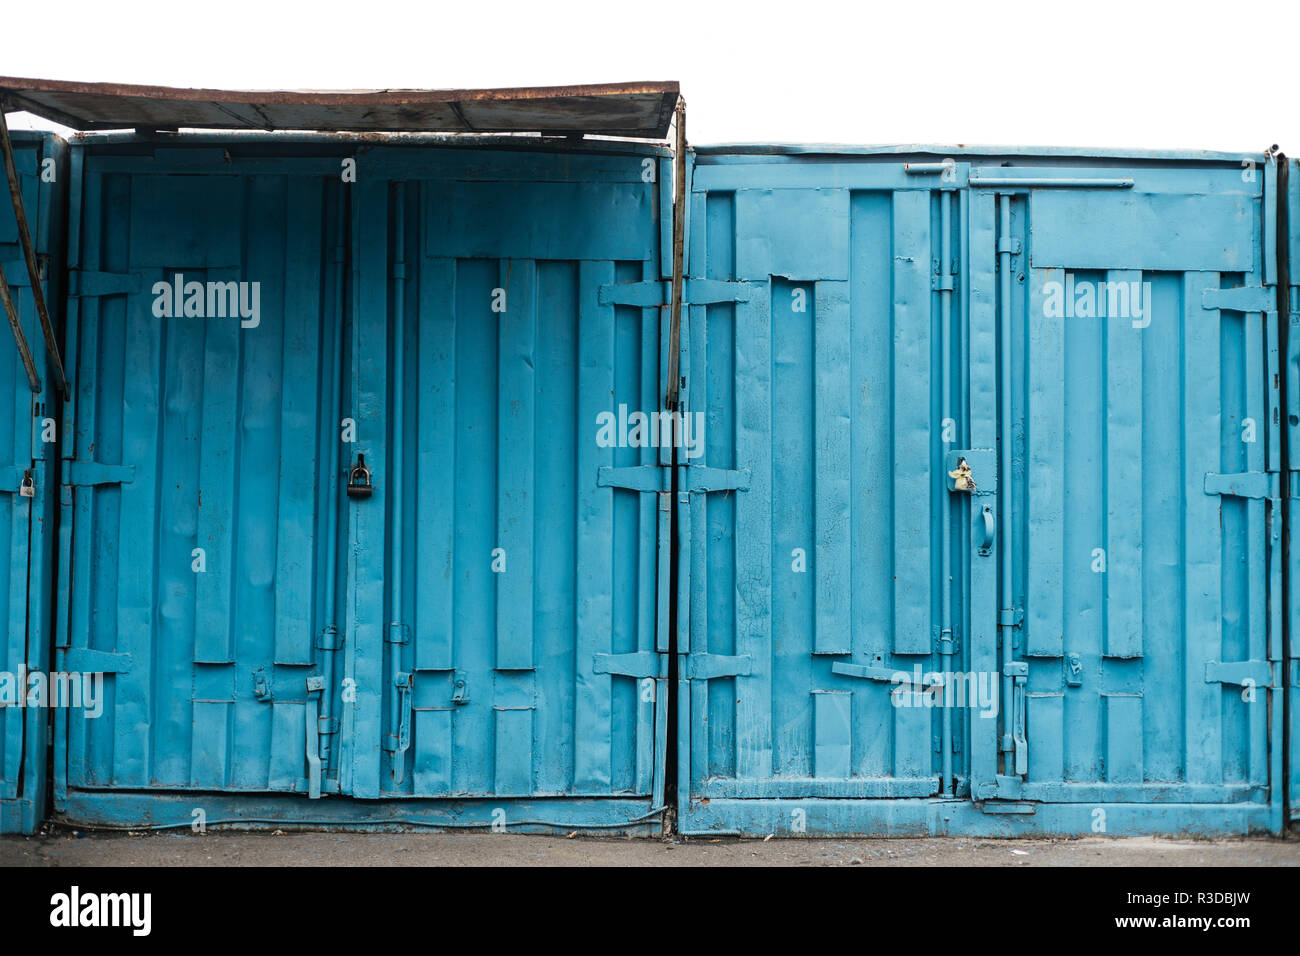 Blue cargo ship containers close up on local market Stock Photo